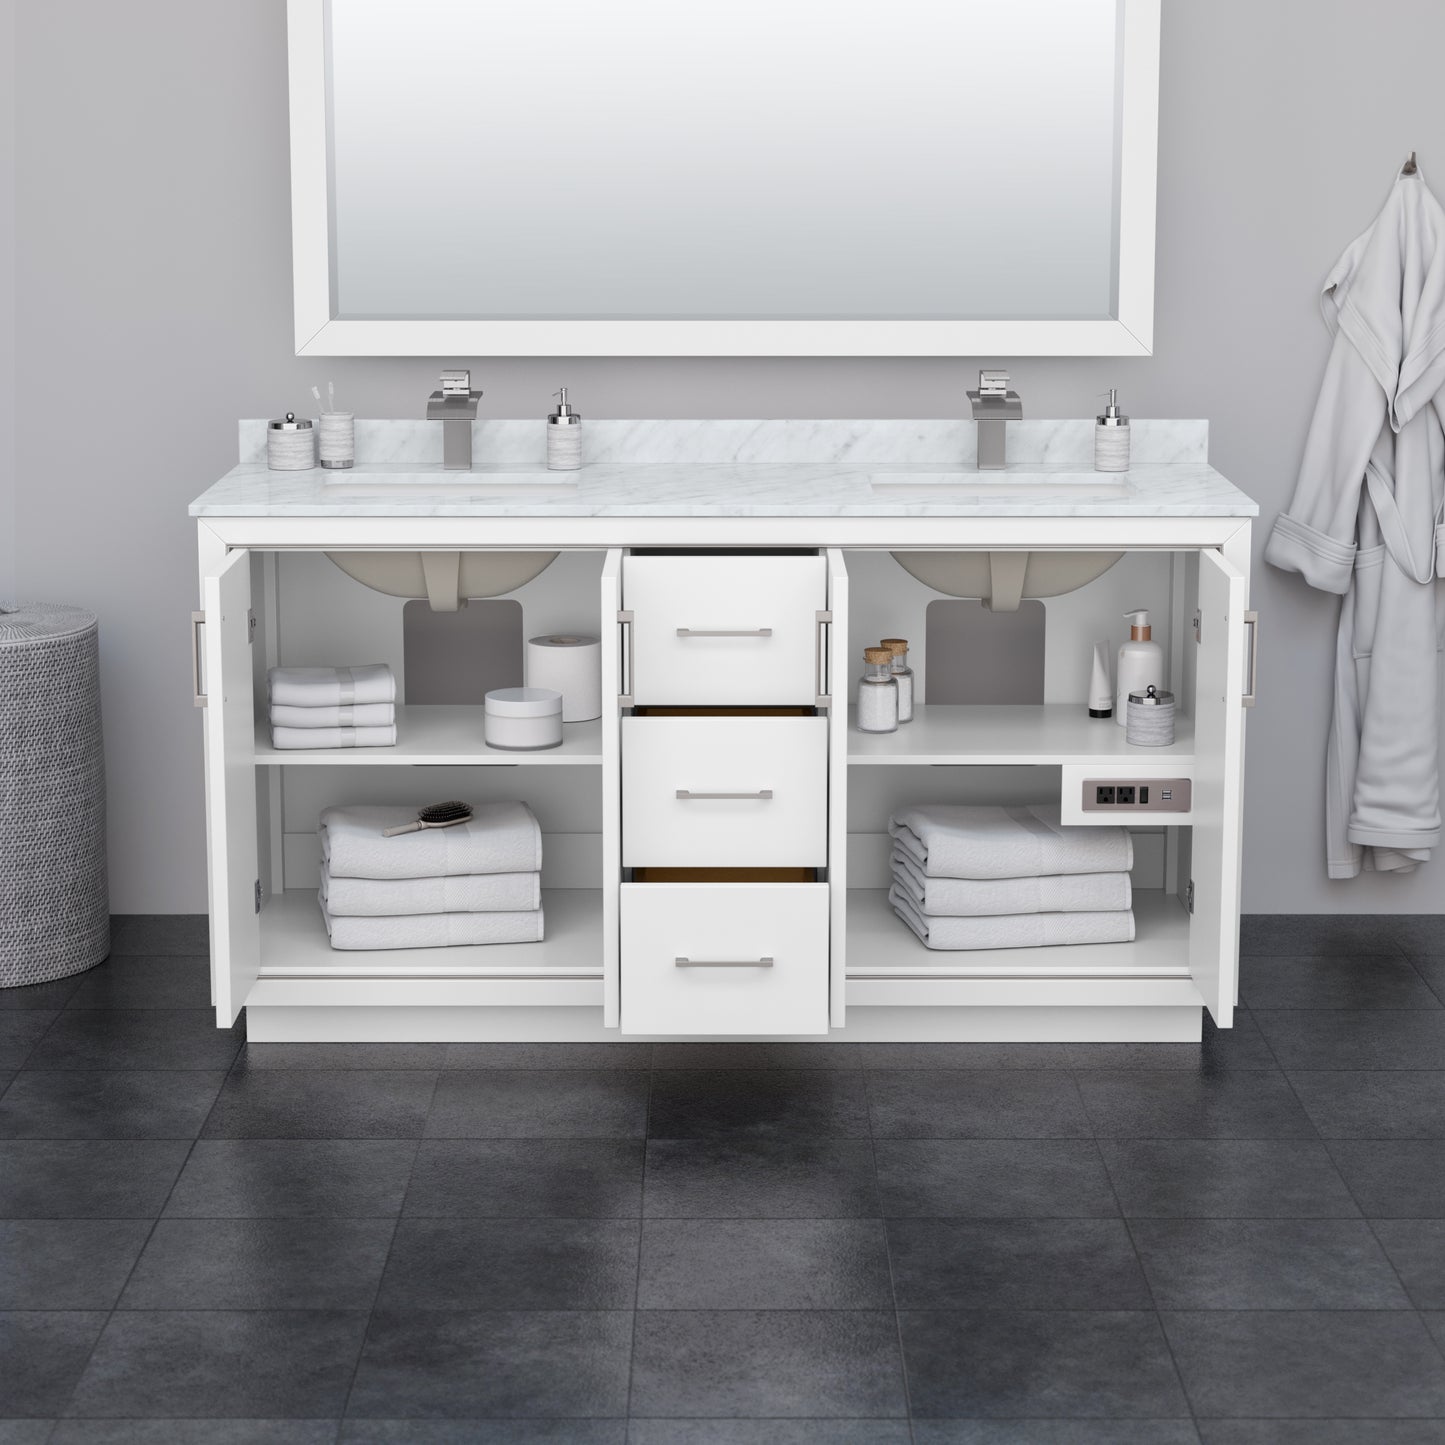 Wyndham Icon 66 Inch Double Bathroom Vanity in White with Carrara Cultured Marble Countertop, Undermount Square Sinks, Satin Bronze Trim and 58 Inch Mirror - Luxe Bathroom Vanities